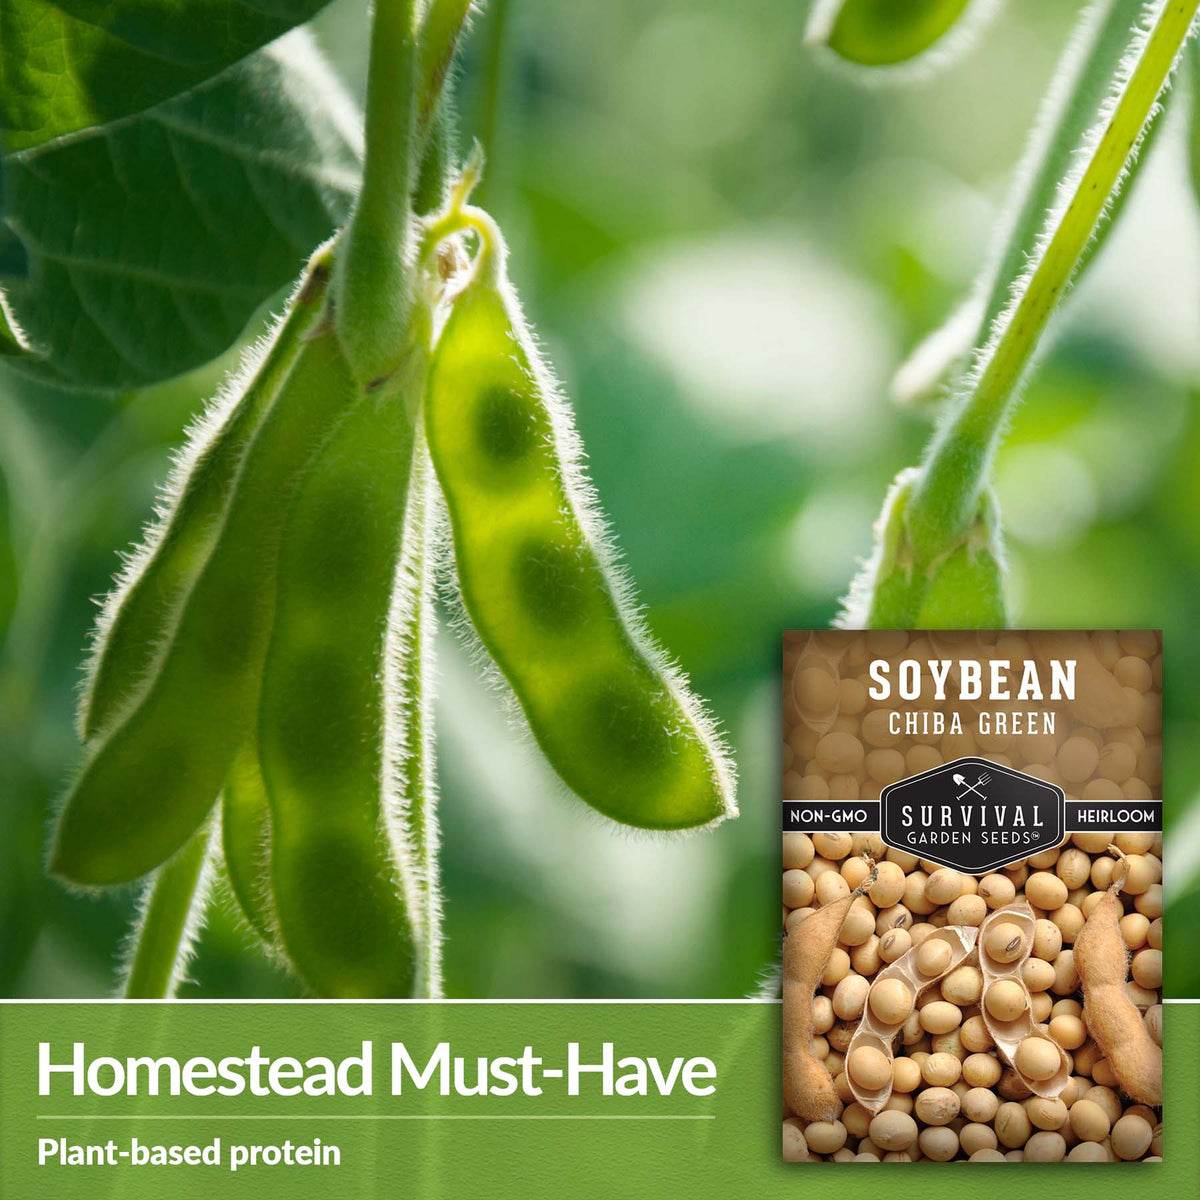 Chiba Green Soybeans are a homestead must have